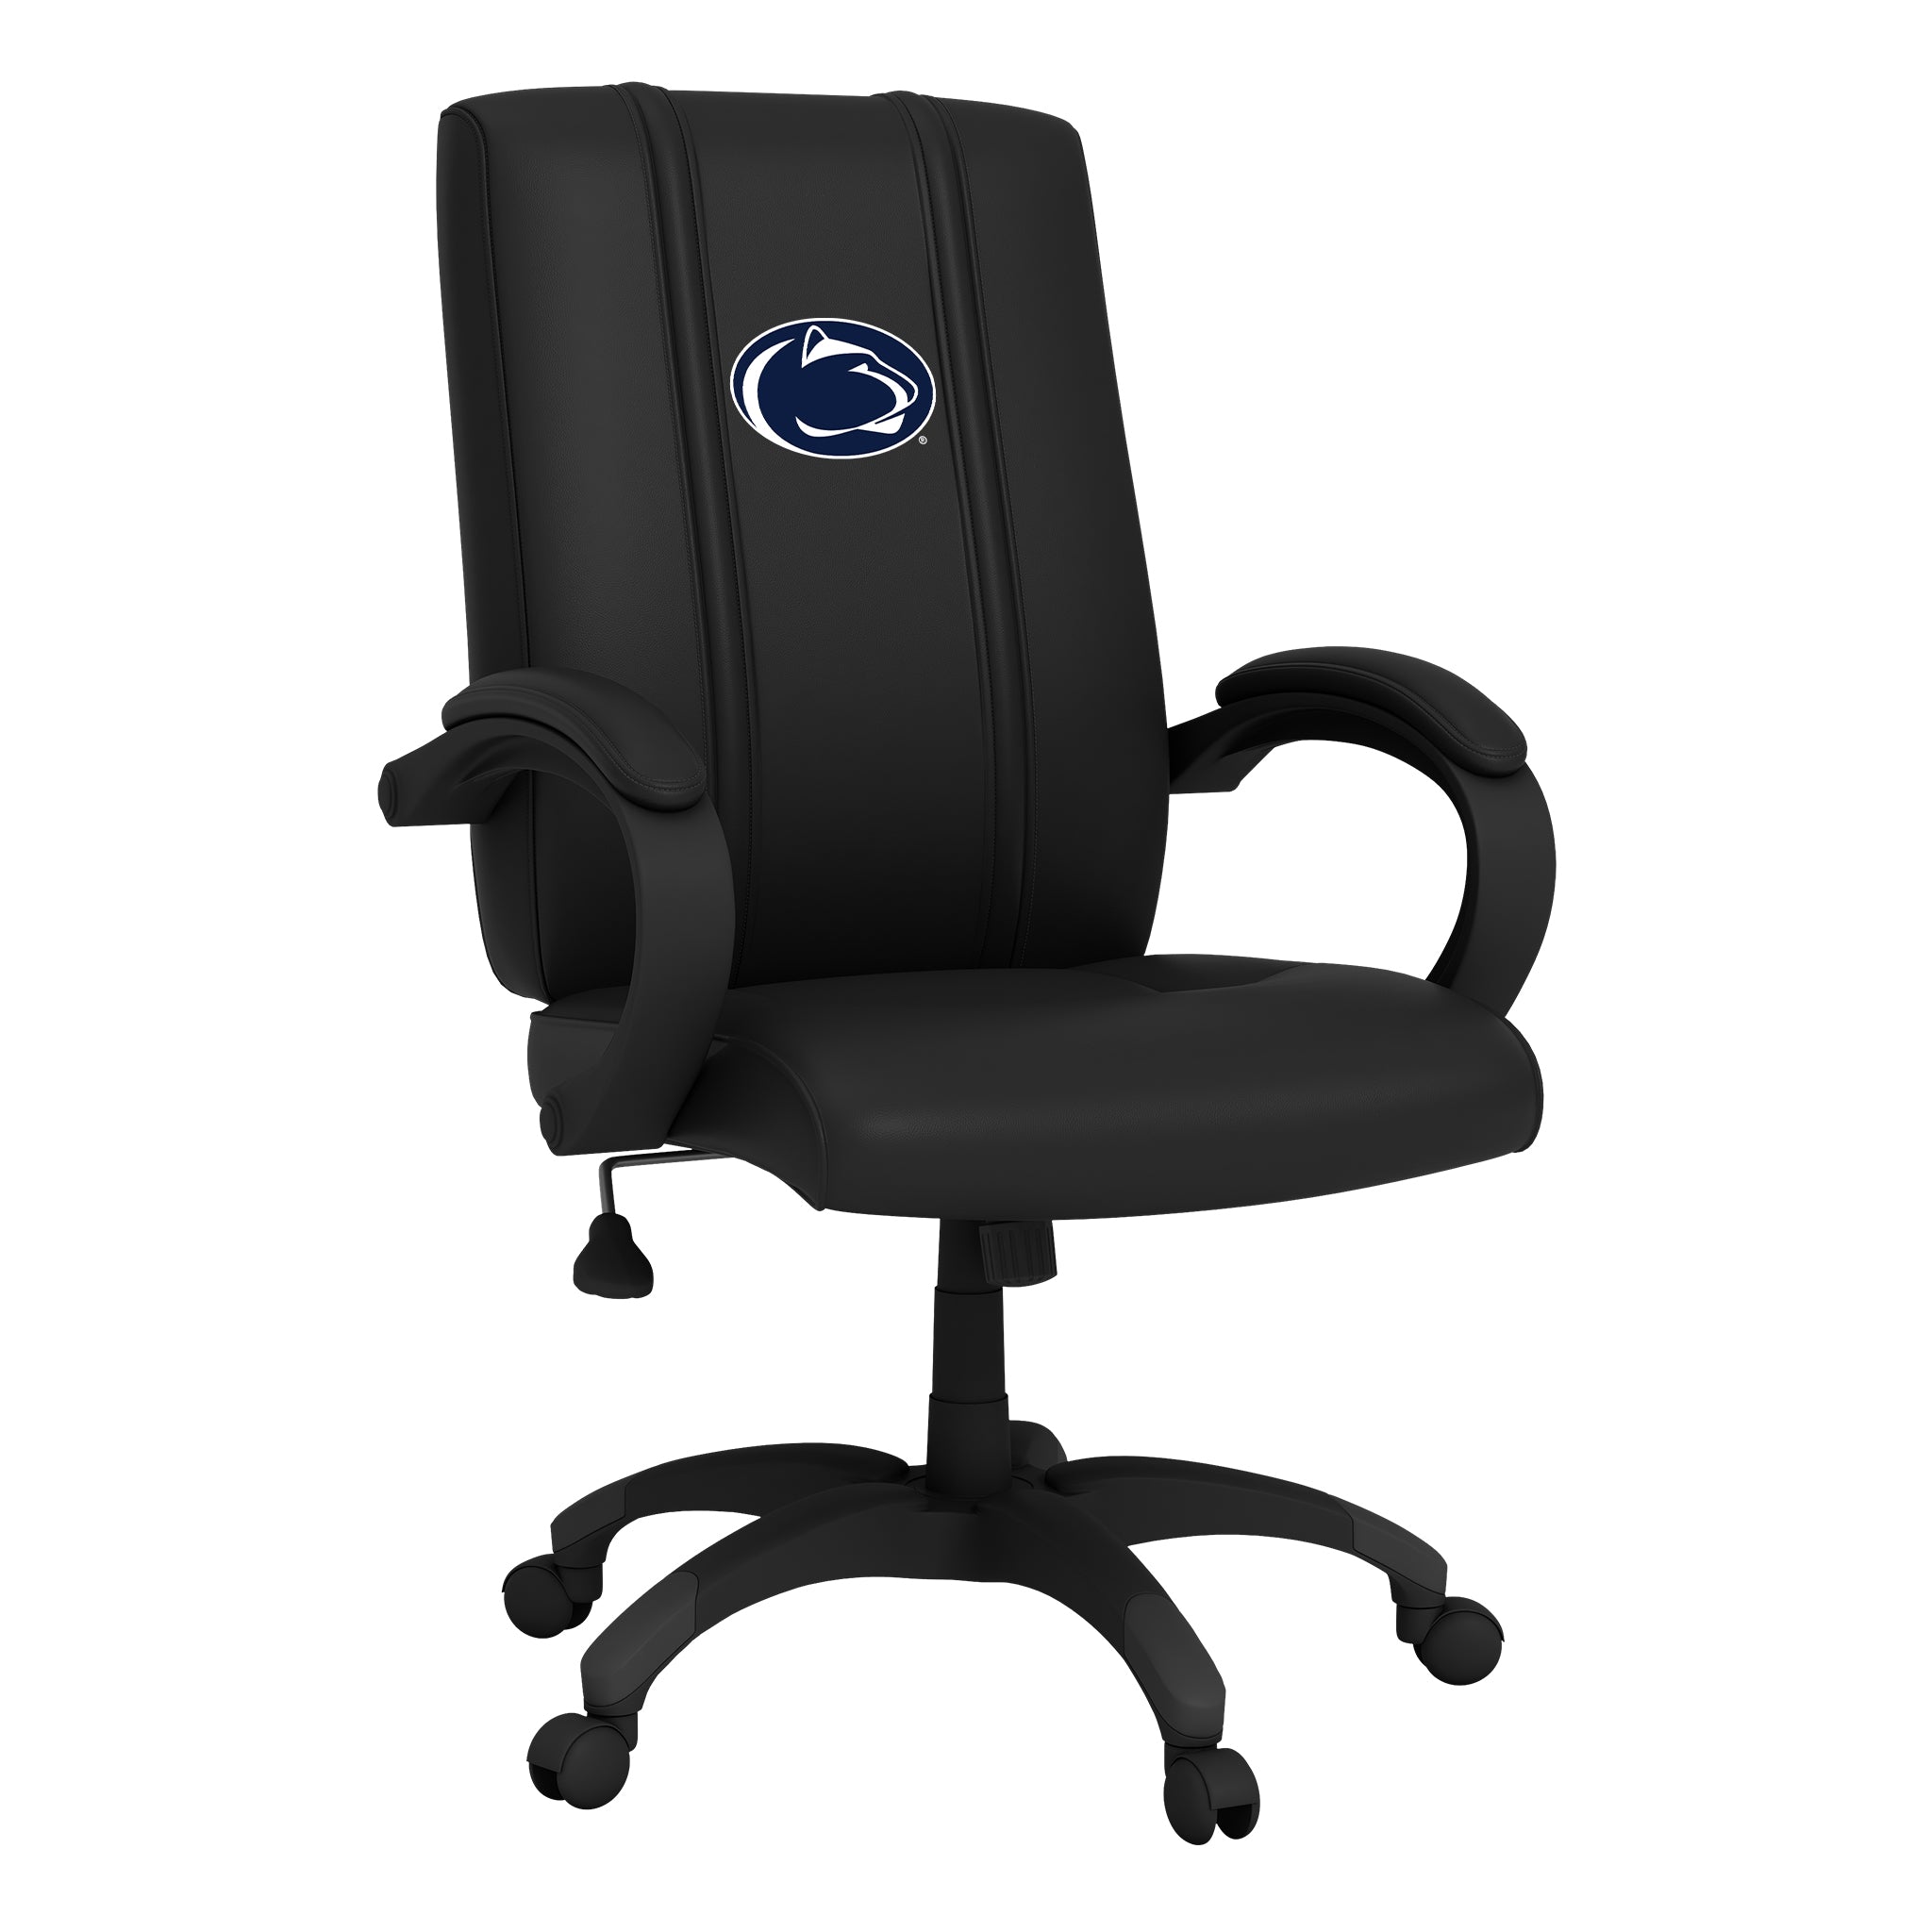 Penn State Nittany Lions Office Chair 1000 with Penn State Nittany Lions Logo